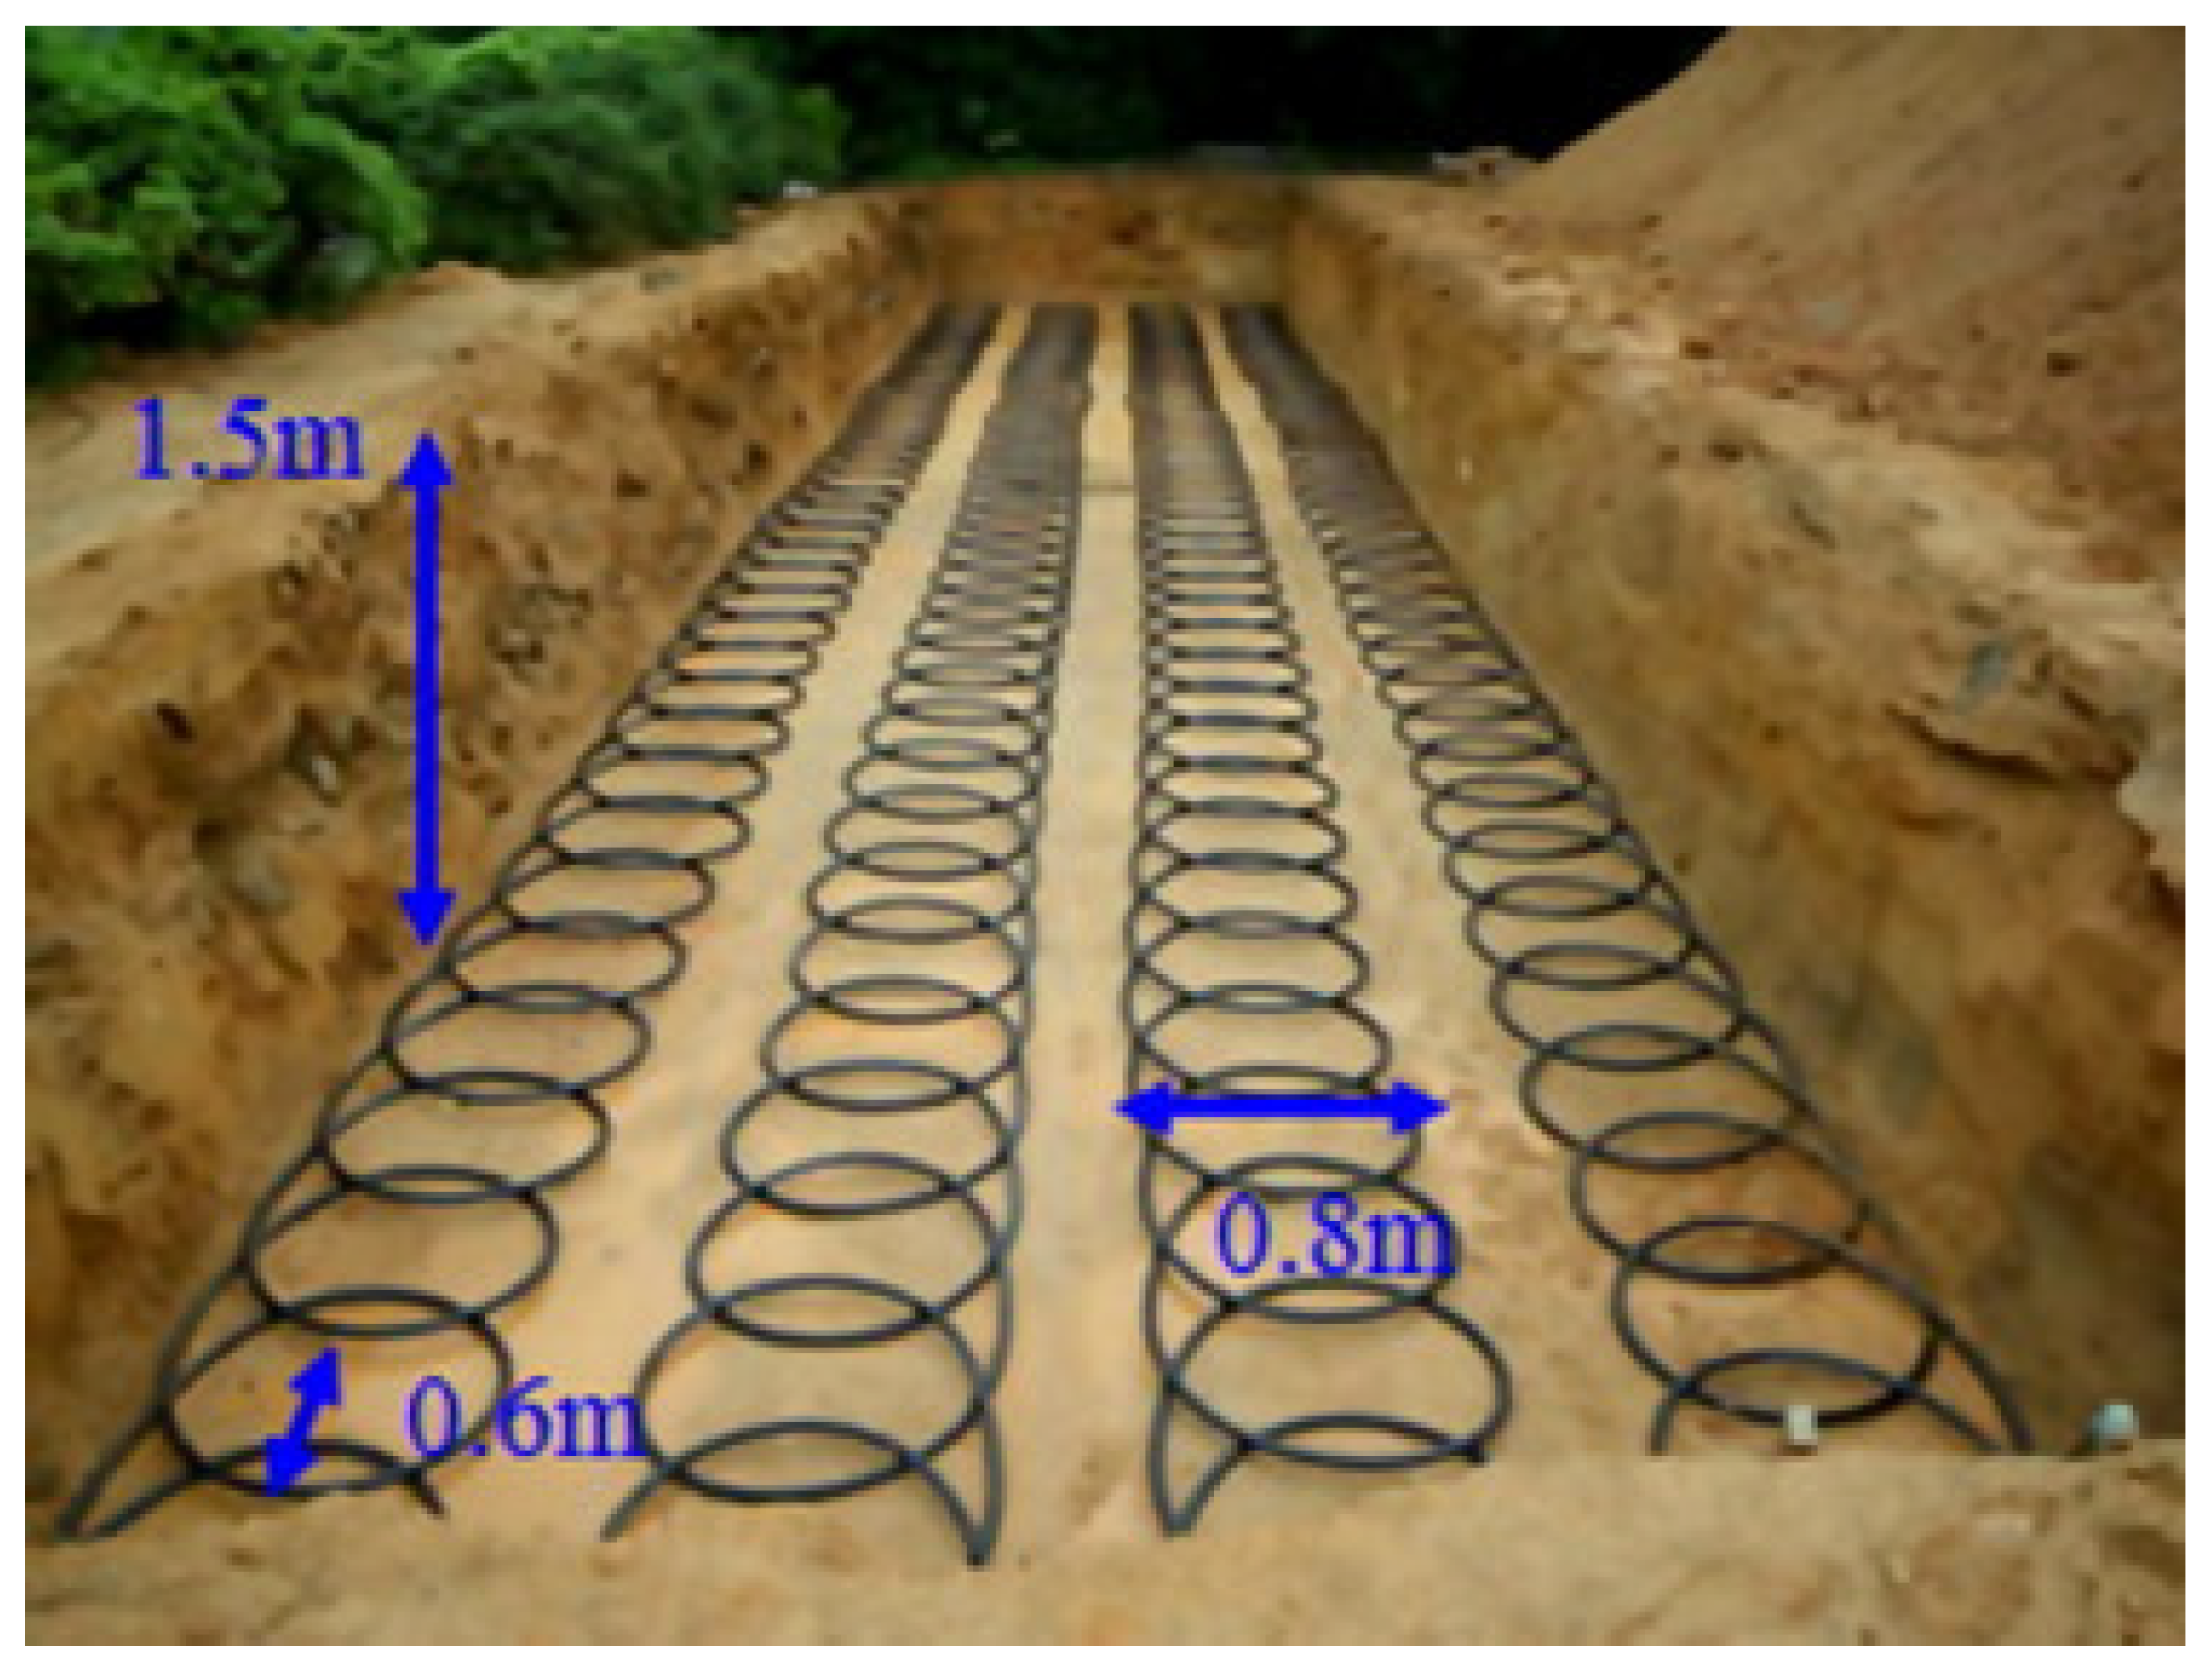 Energies Free Full Text A Review Of Underground Soil And